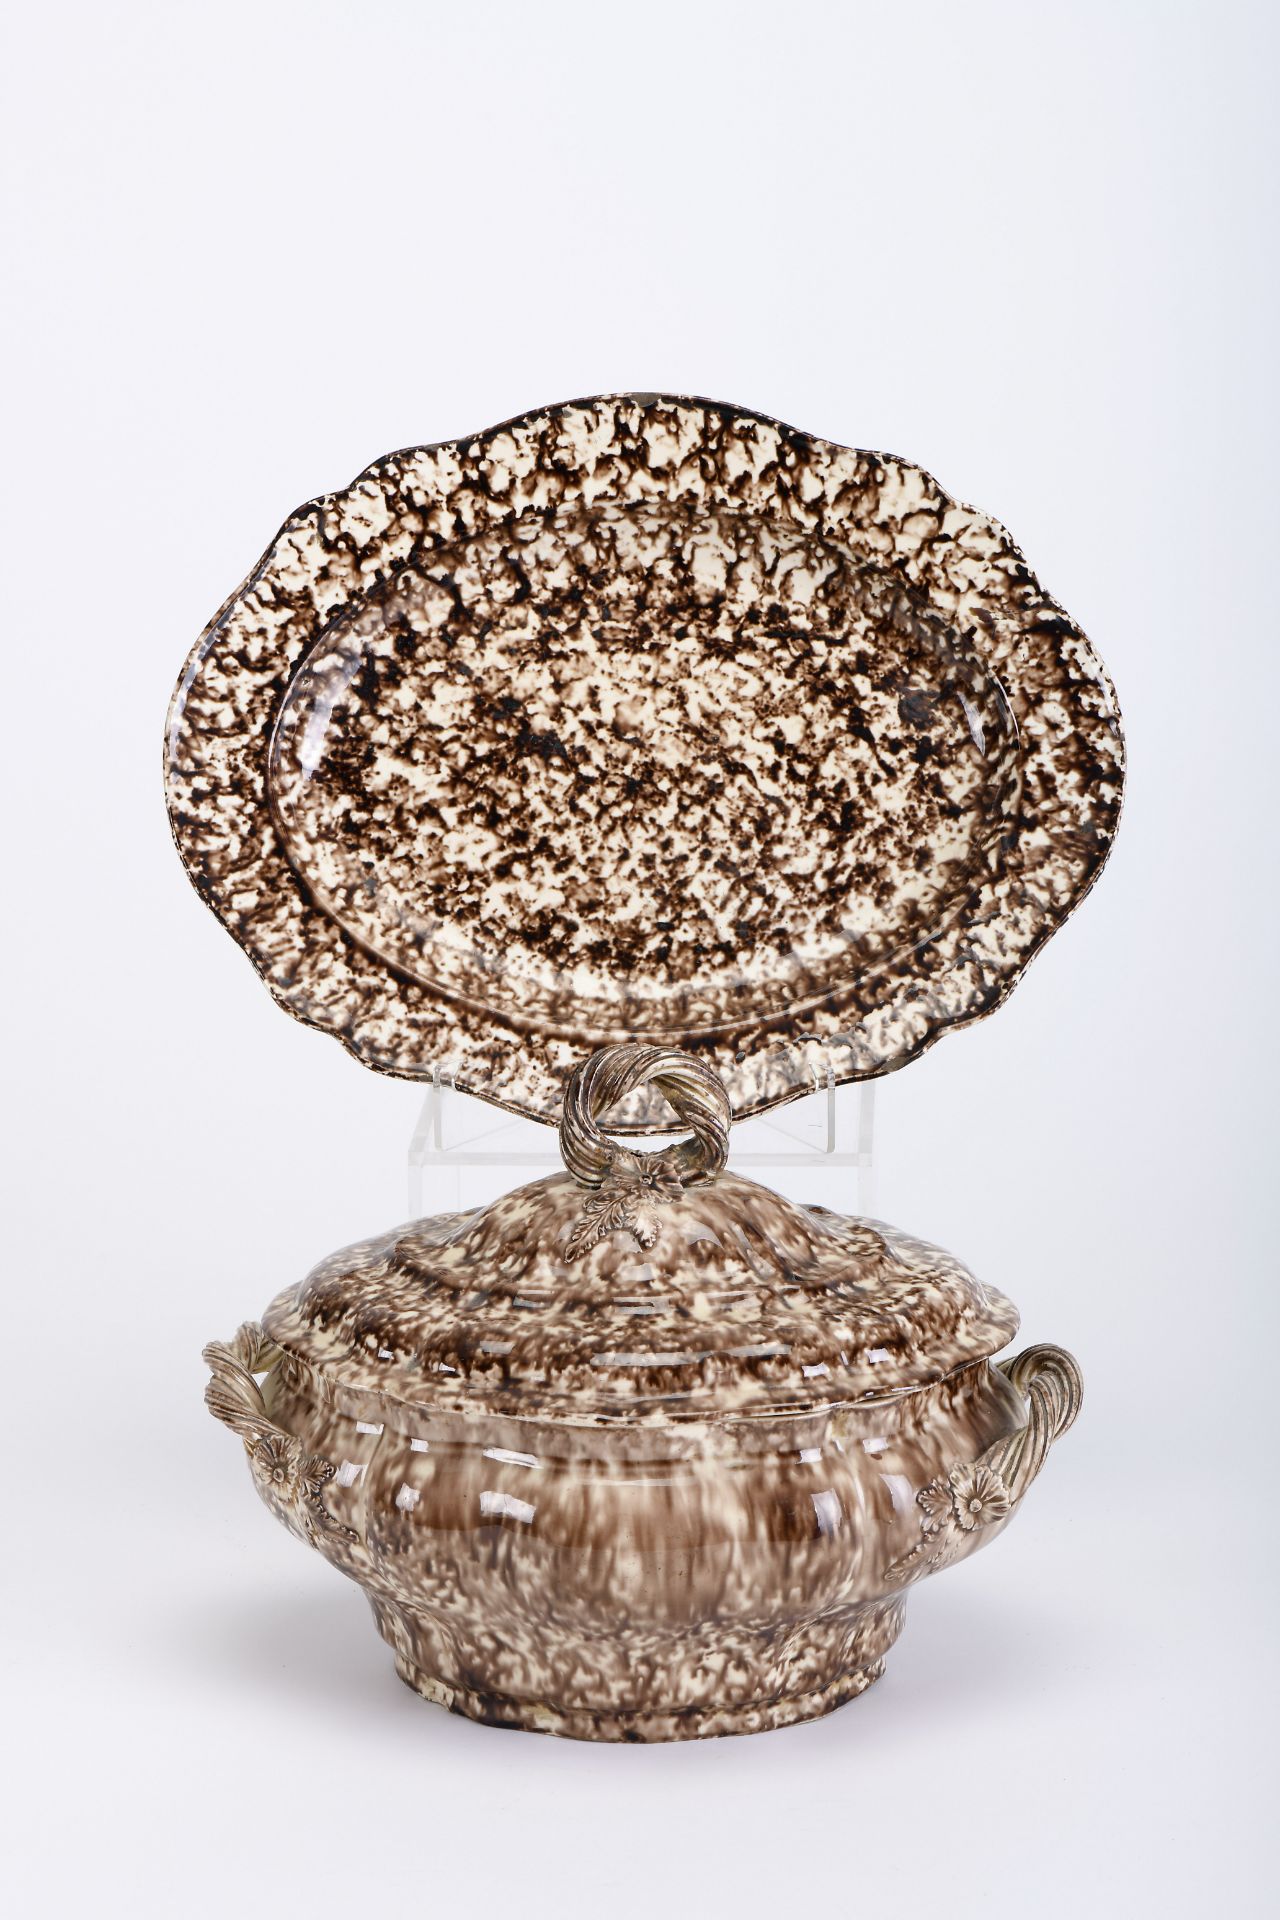 An oval scalloped tureen with stand - Image 3 of 3